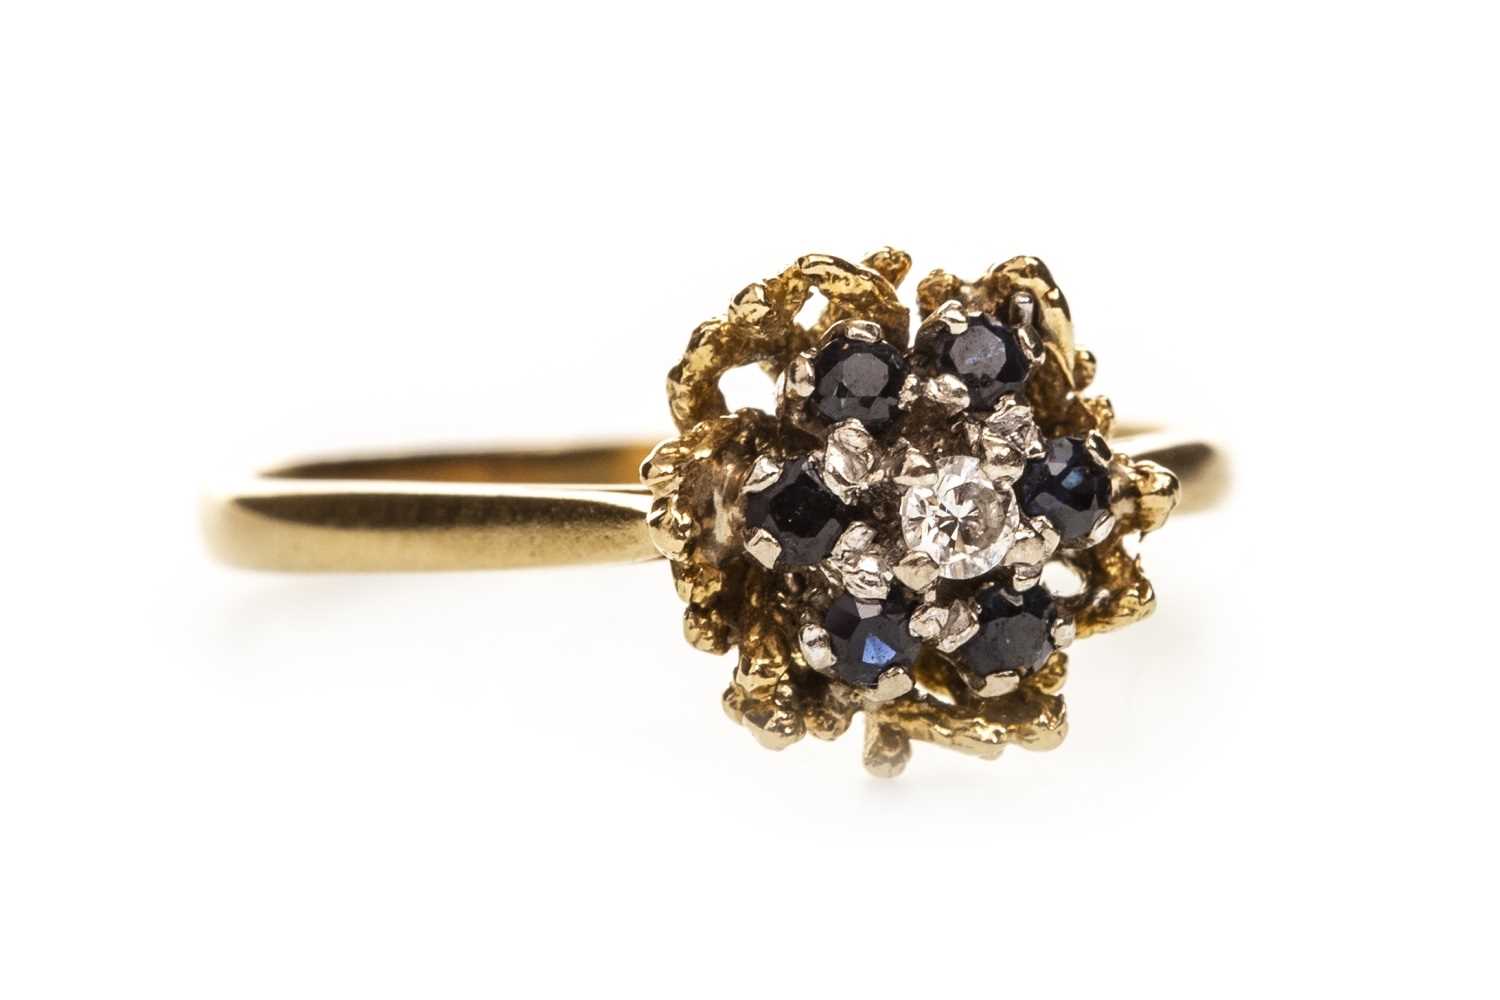 Lot 195 - A DIAMOND AND BLUE GEM SET CLUSTER RING